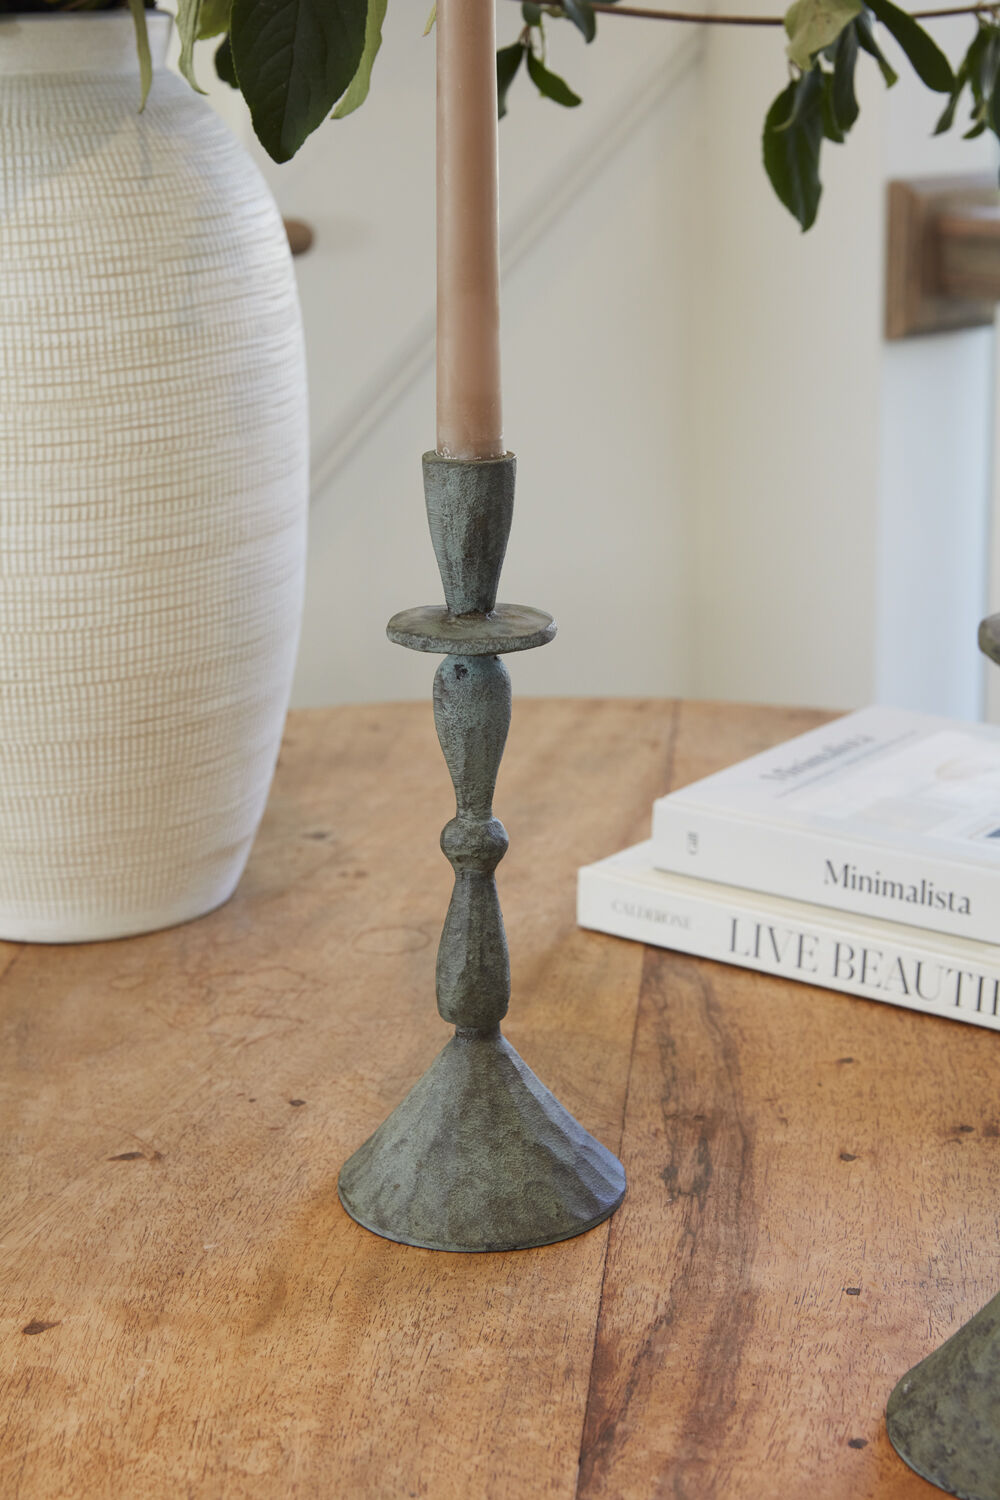 The Bristol Candlestck by Accent Decor | Luxury Candle Holders | Willow & Albert Home